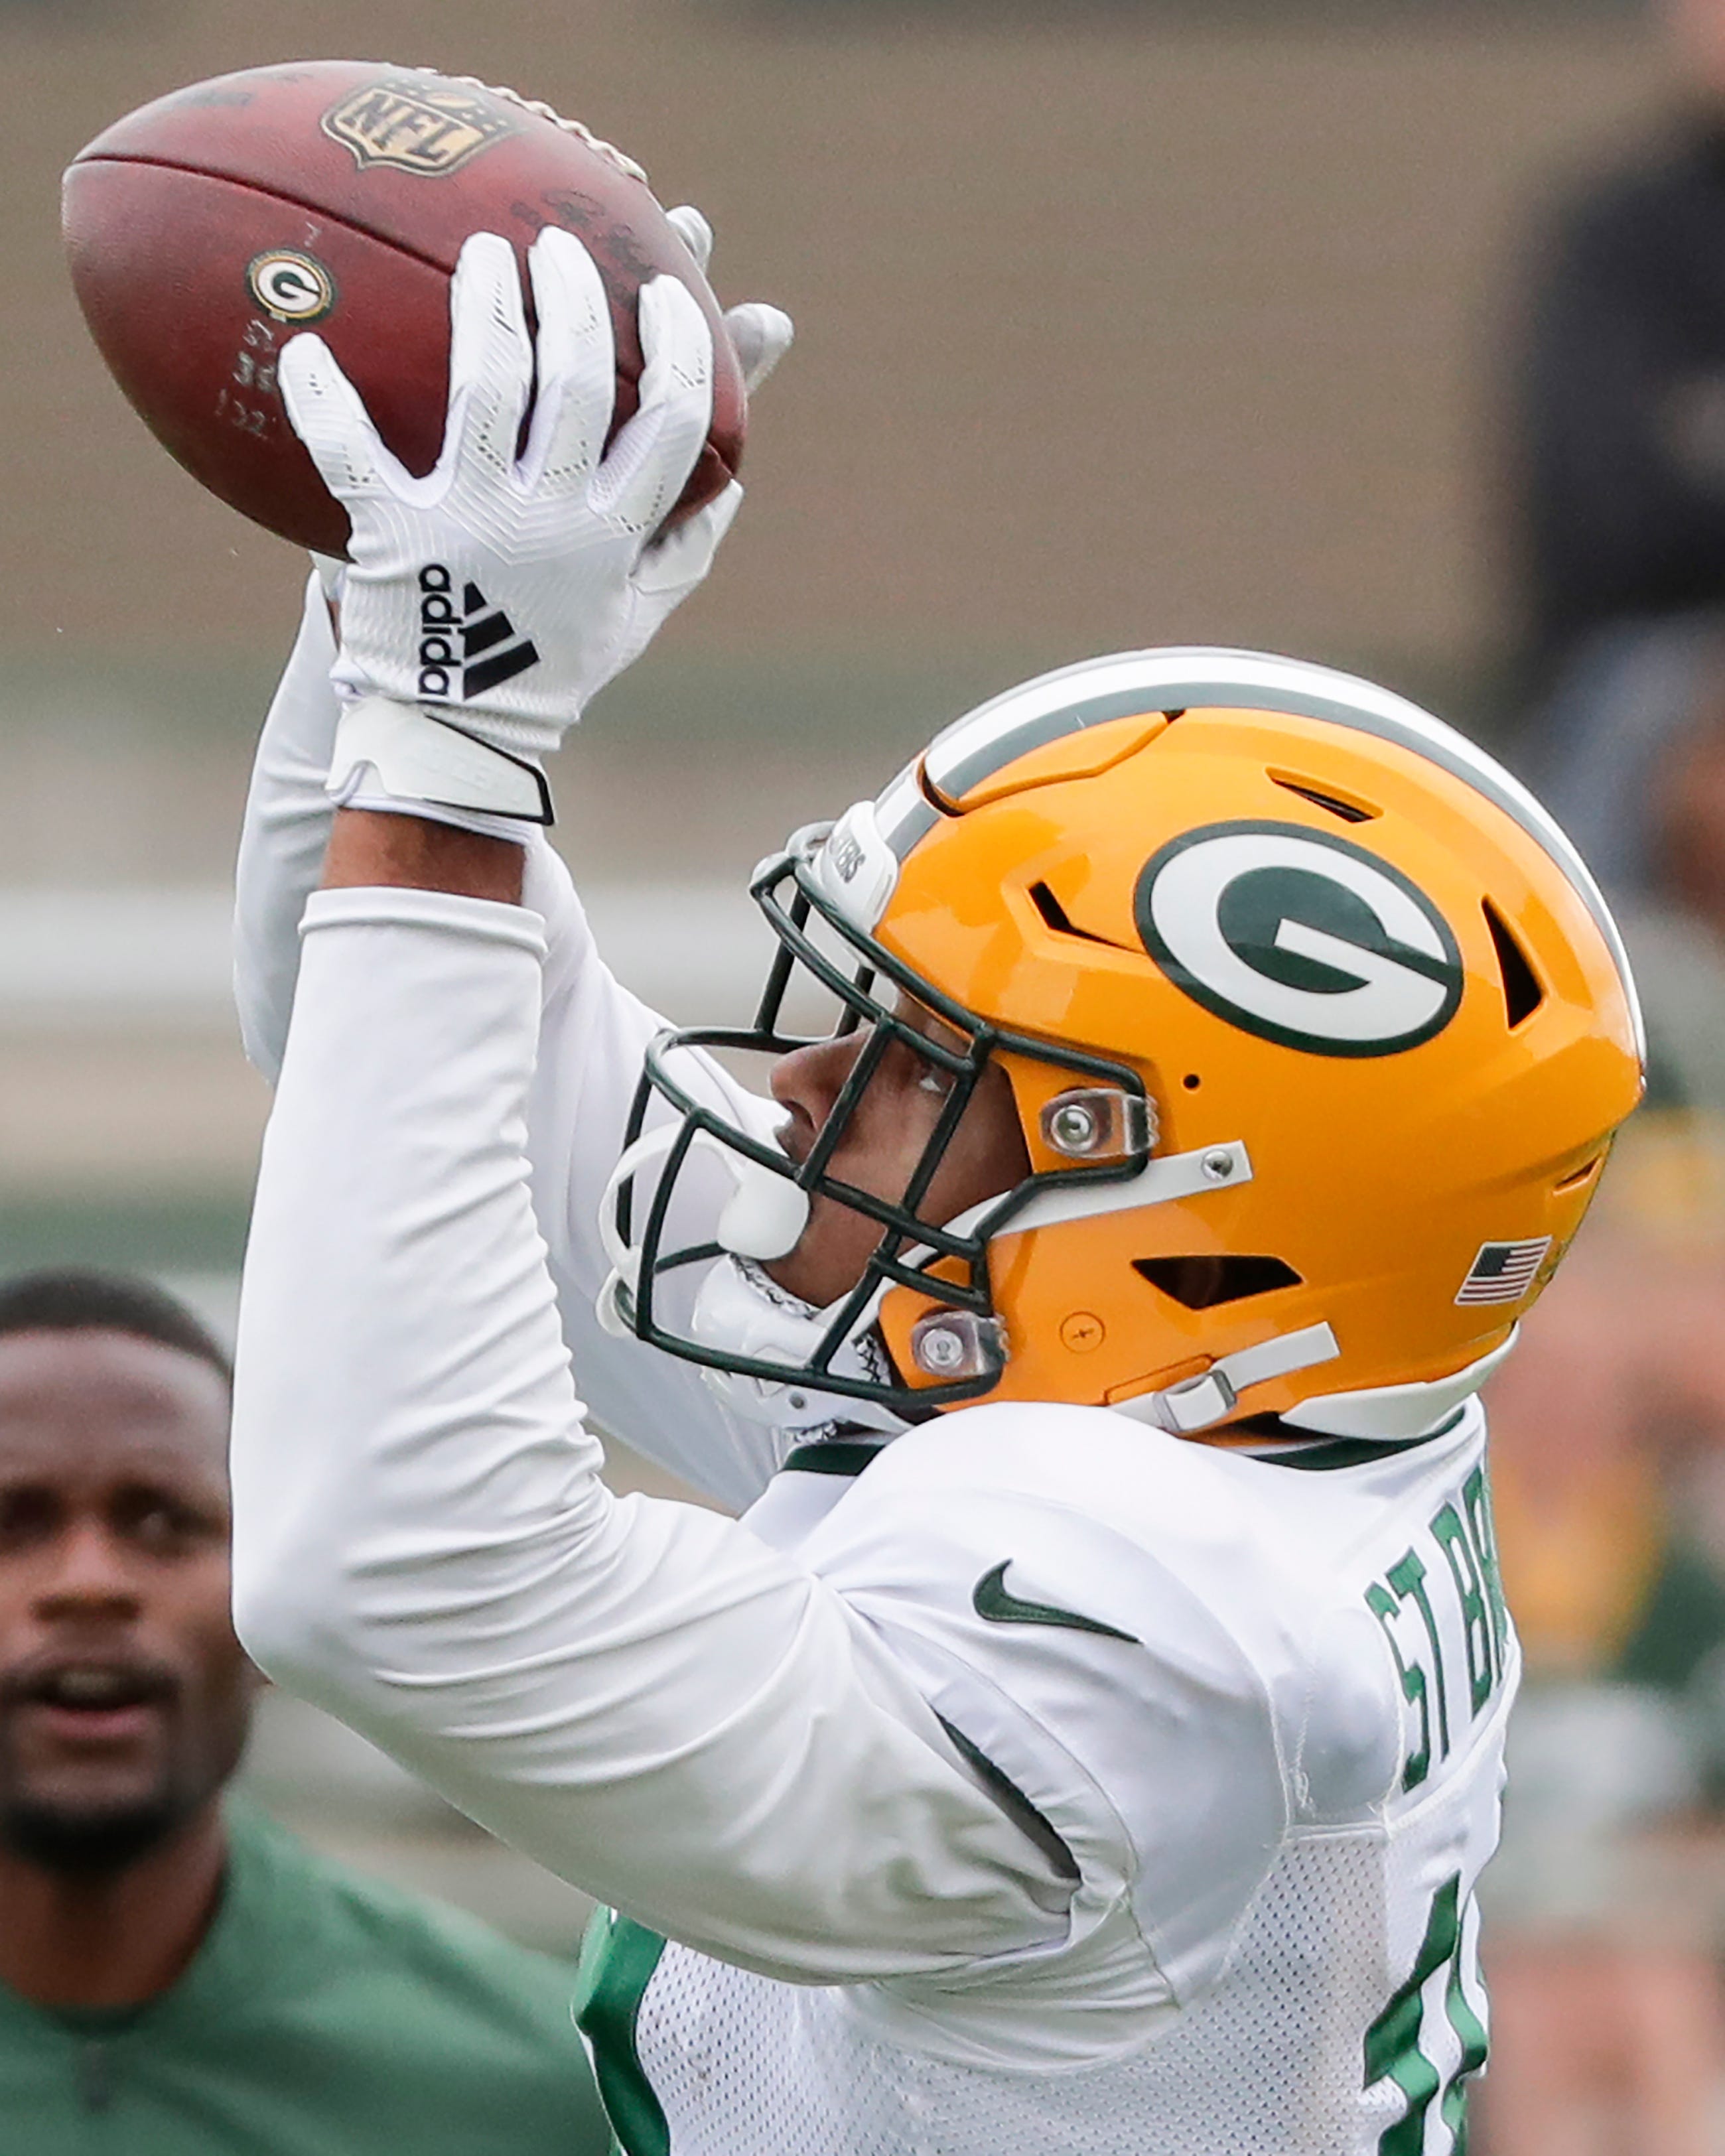 Green Bay Packers' Equanimeous St. Brown catches a pass during training camp practice Tuesday, August 13, 2019, at Ray Nitschke Field in Ashwaubenon, Wis.